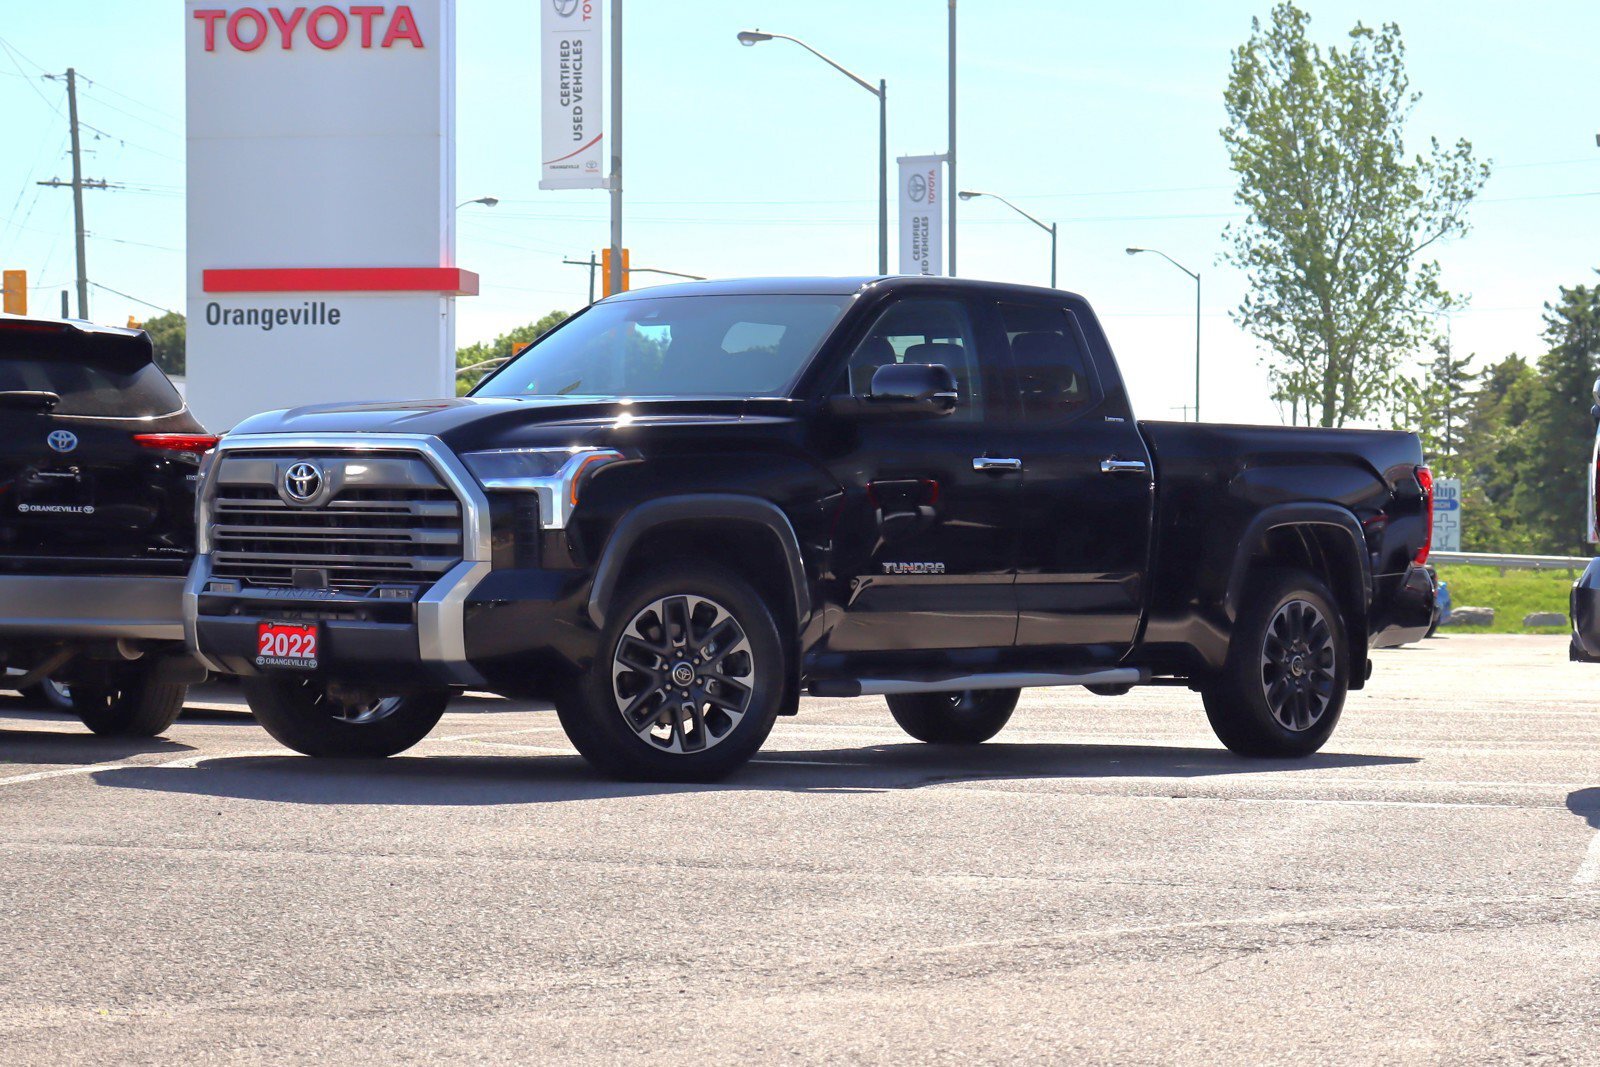 2022 Toyota Tundra Limited 4x4, Double Cab, Leather Heated Seats